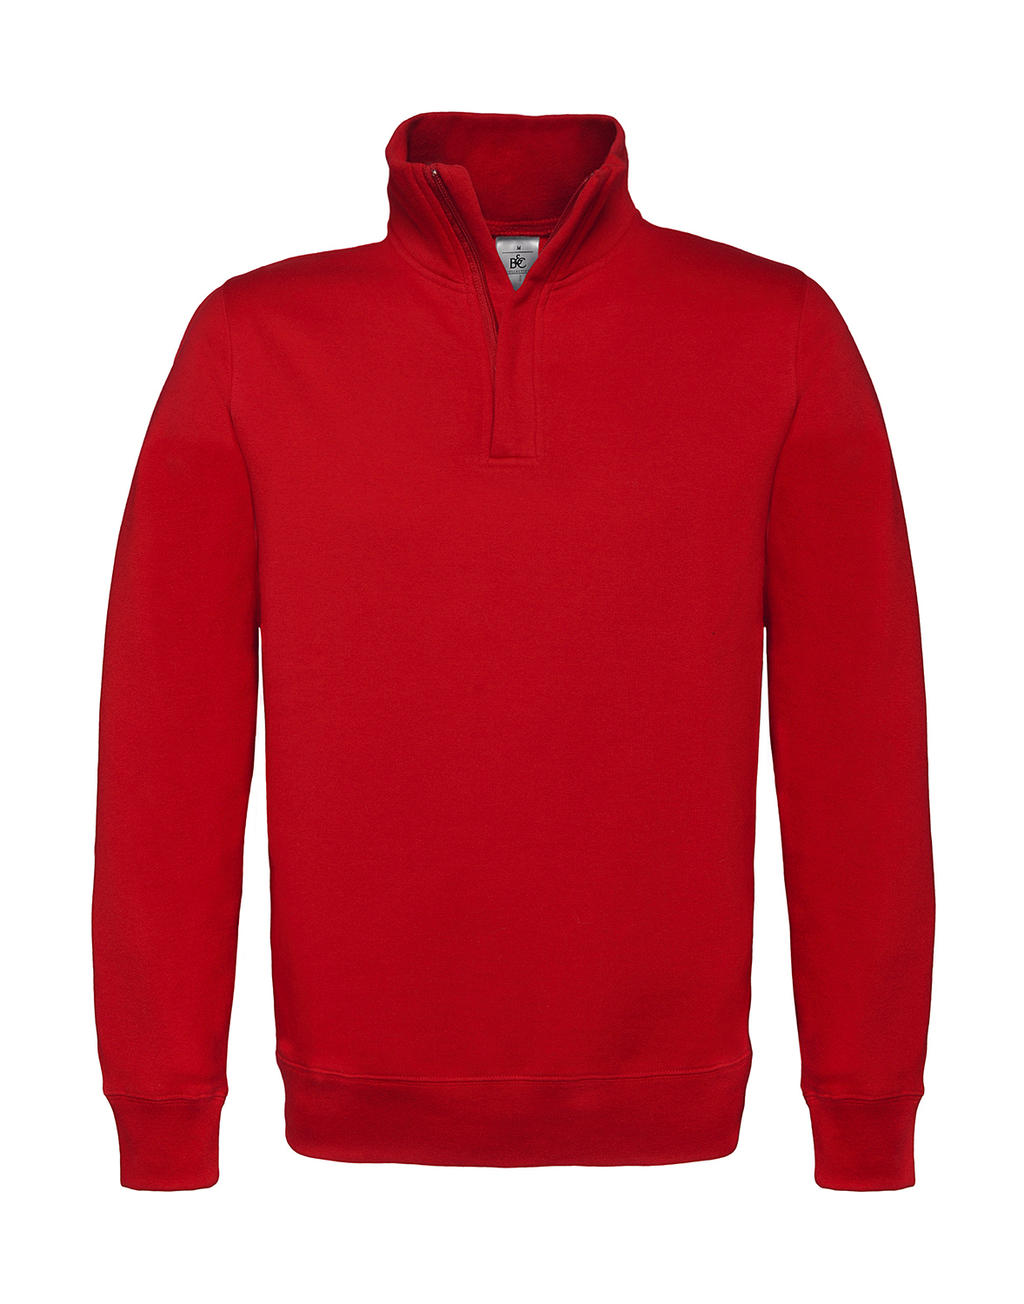  ID.004 Cotton Rich 1/4 Zip Sweat in Farbe Red